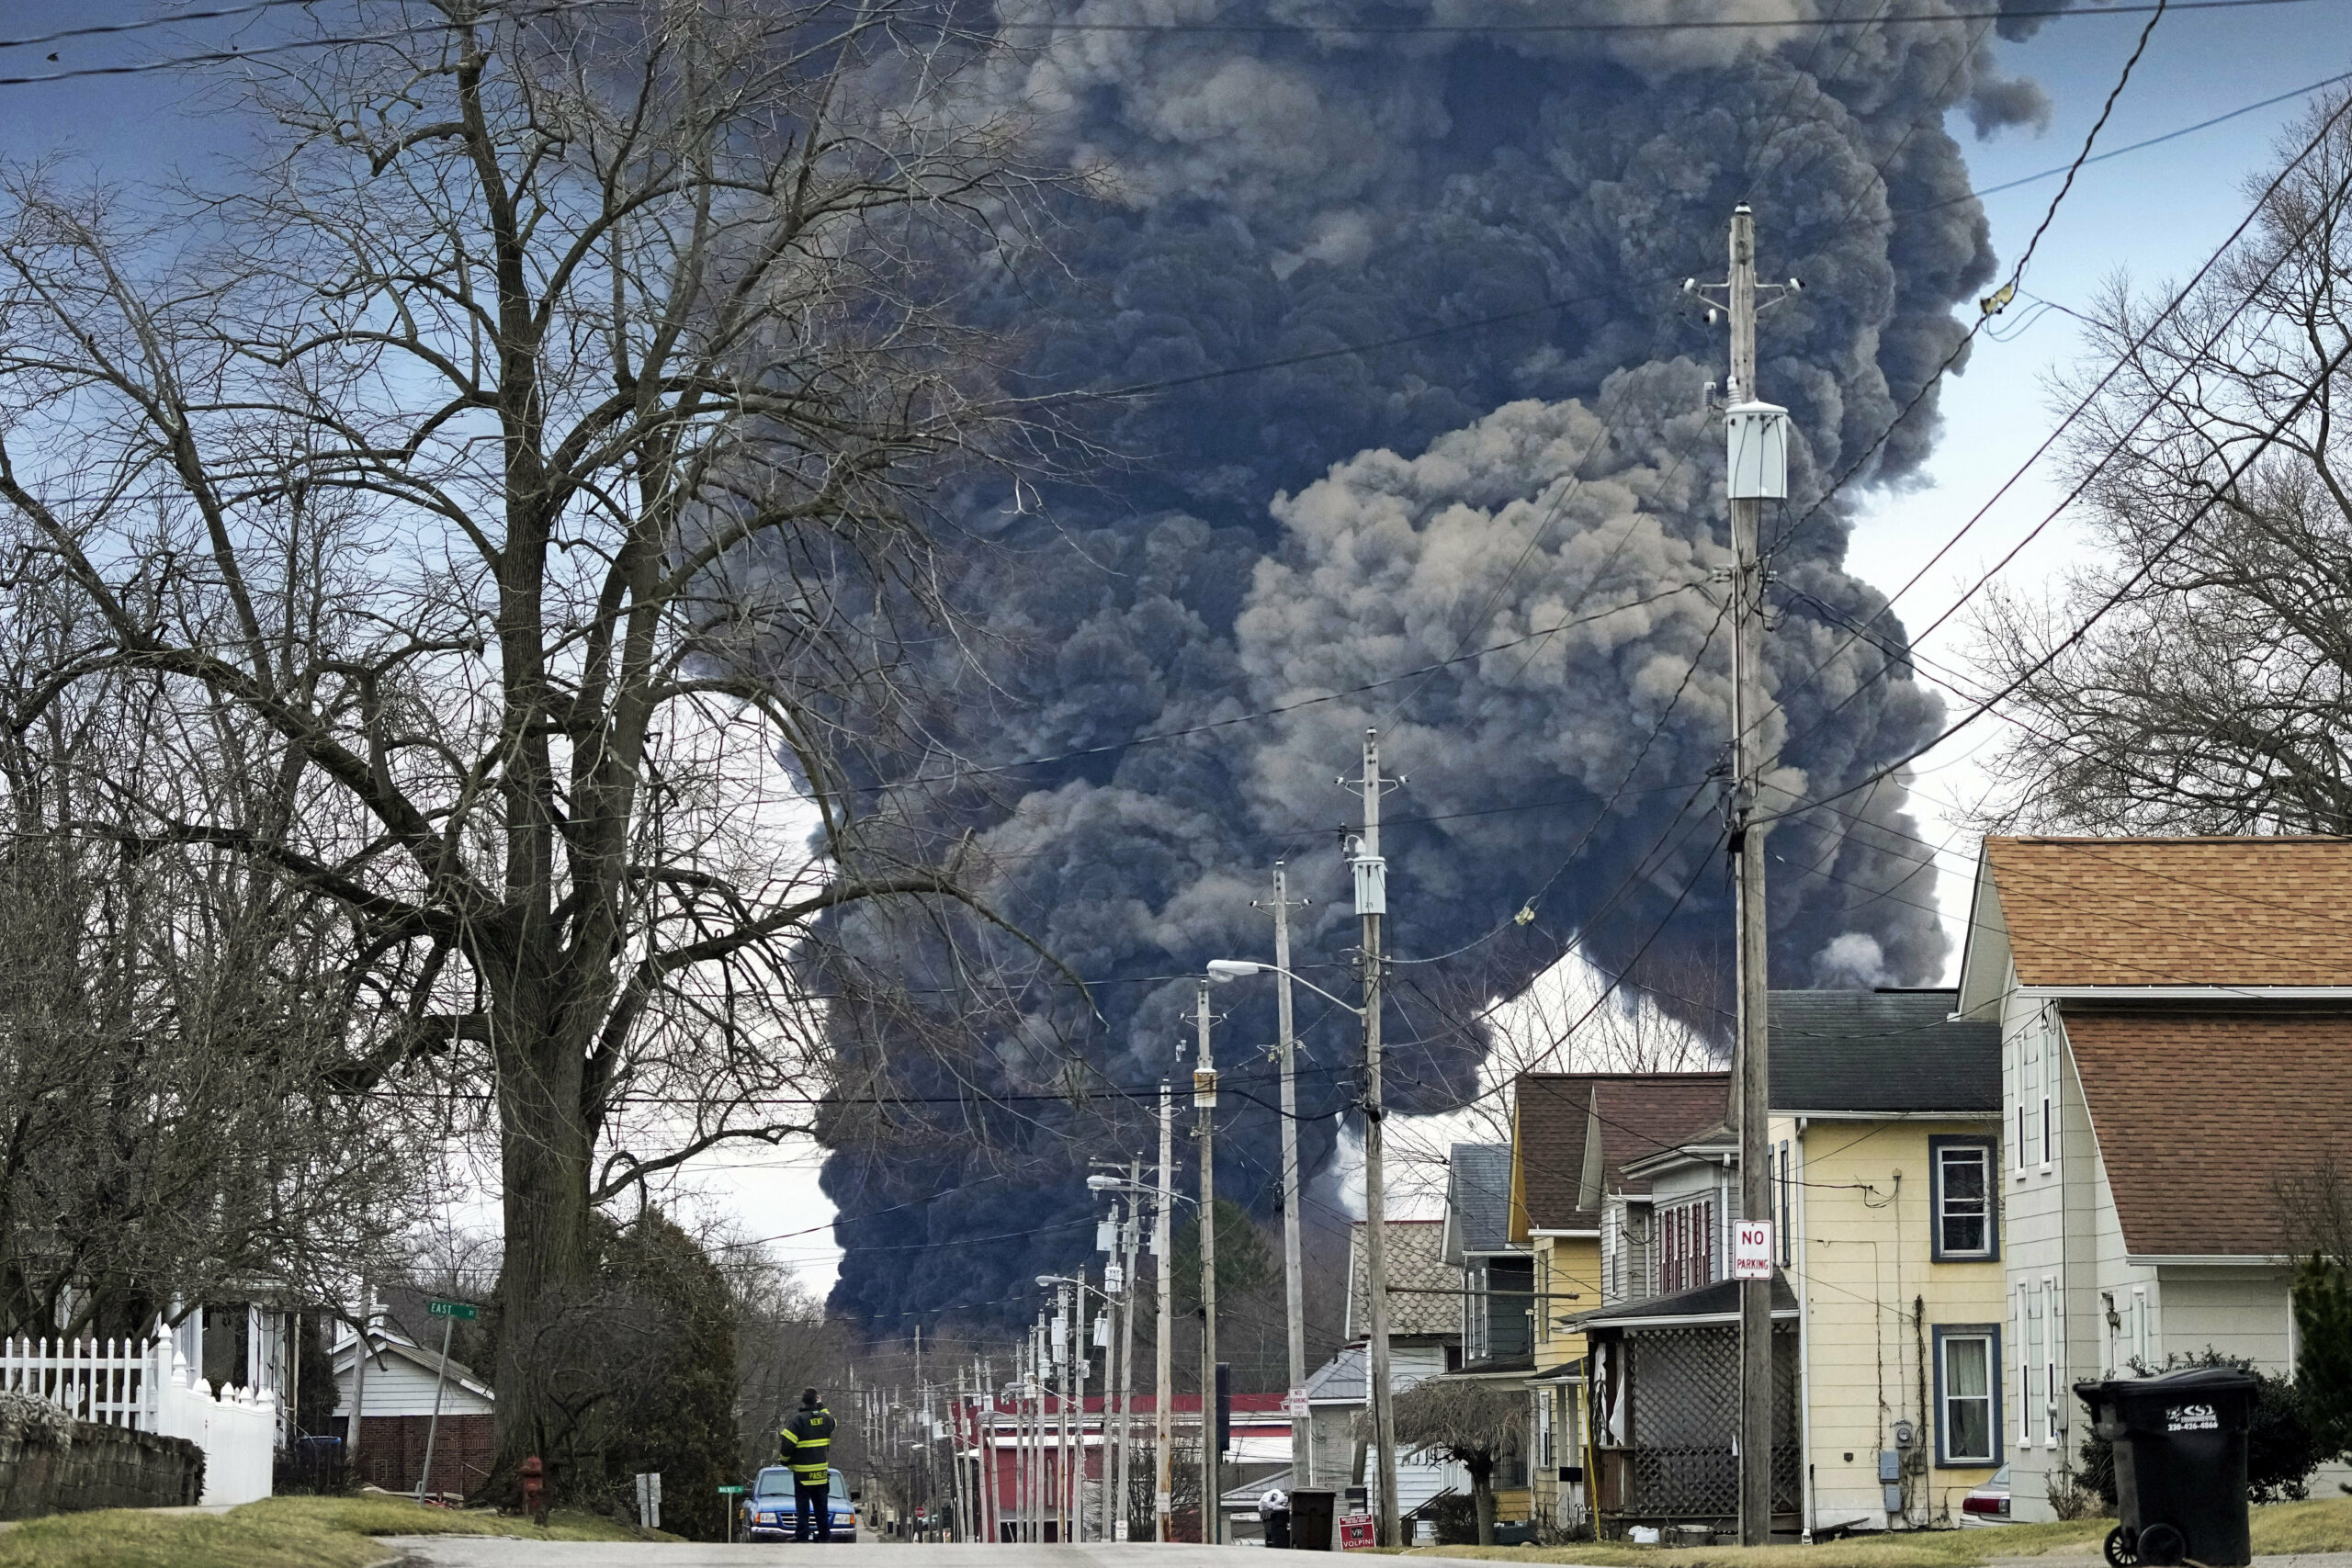 Blowing Up Train Cars Full Of Toxic Chemicals Wasn’t Necessary, Investigation Finds